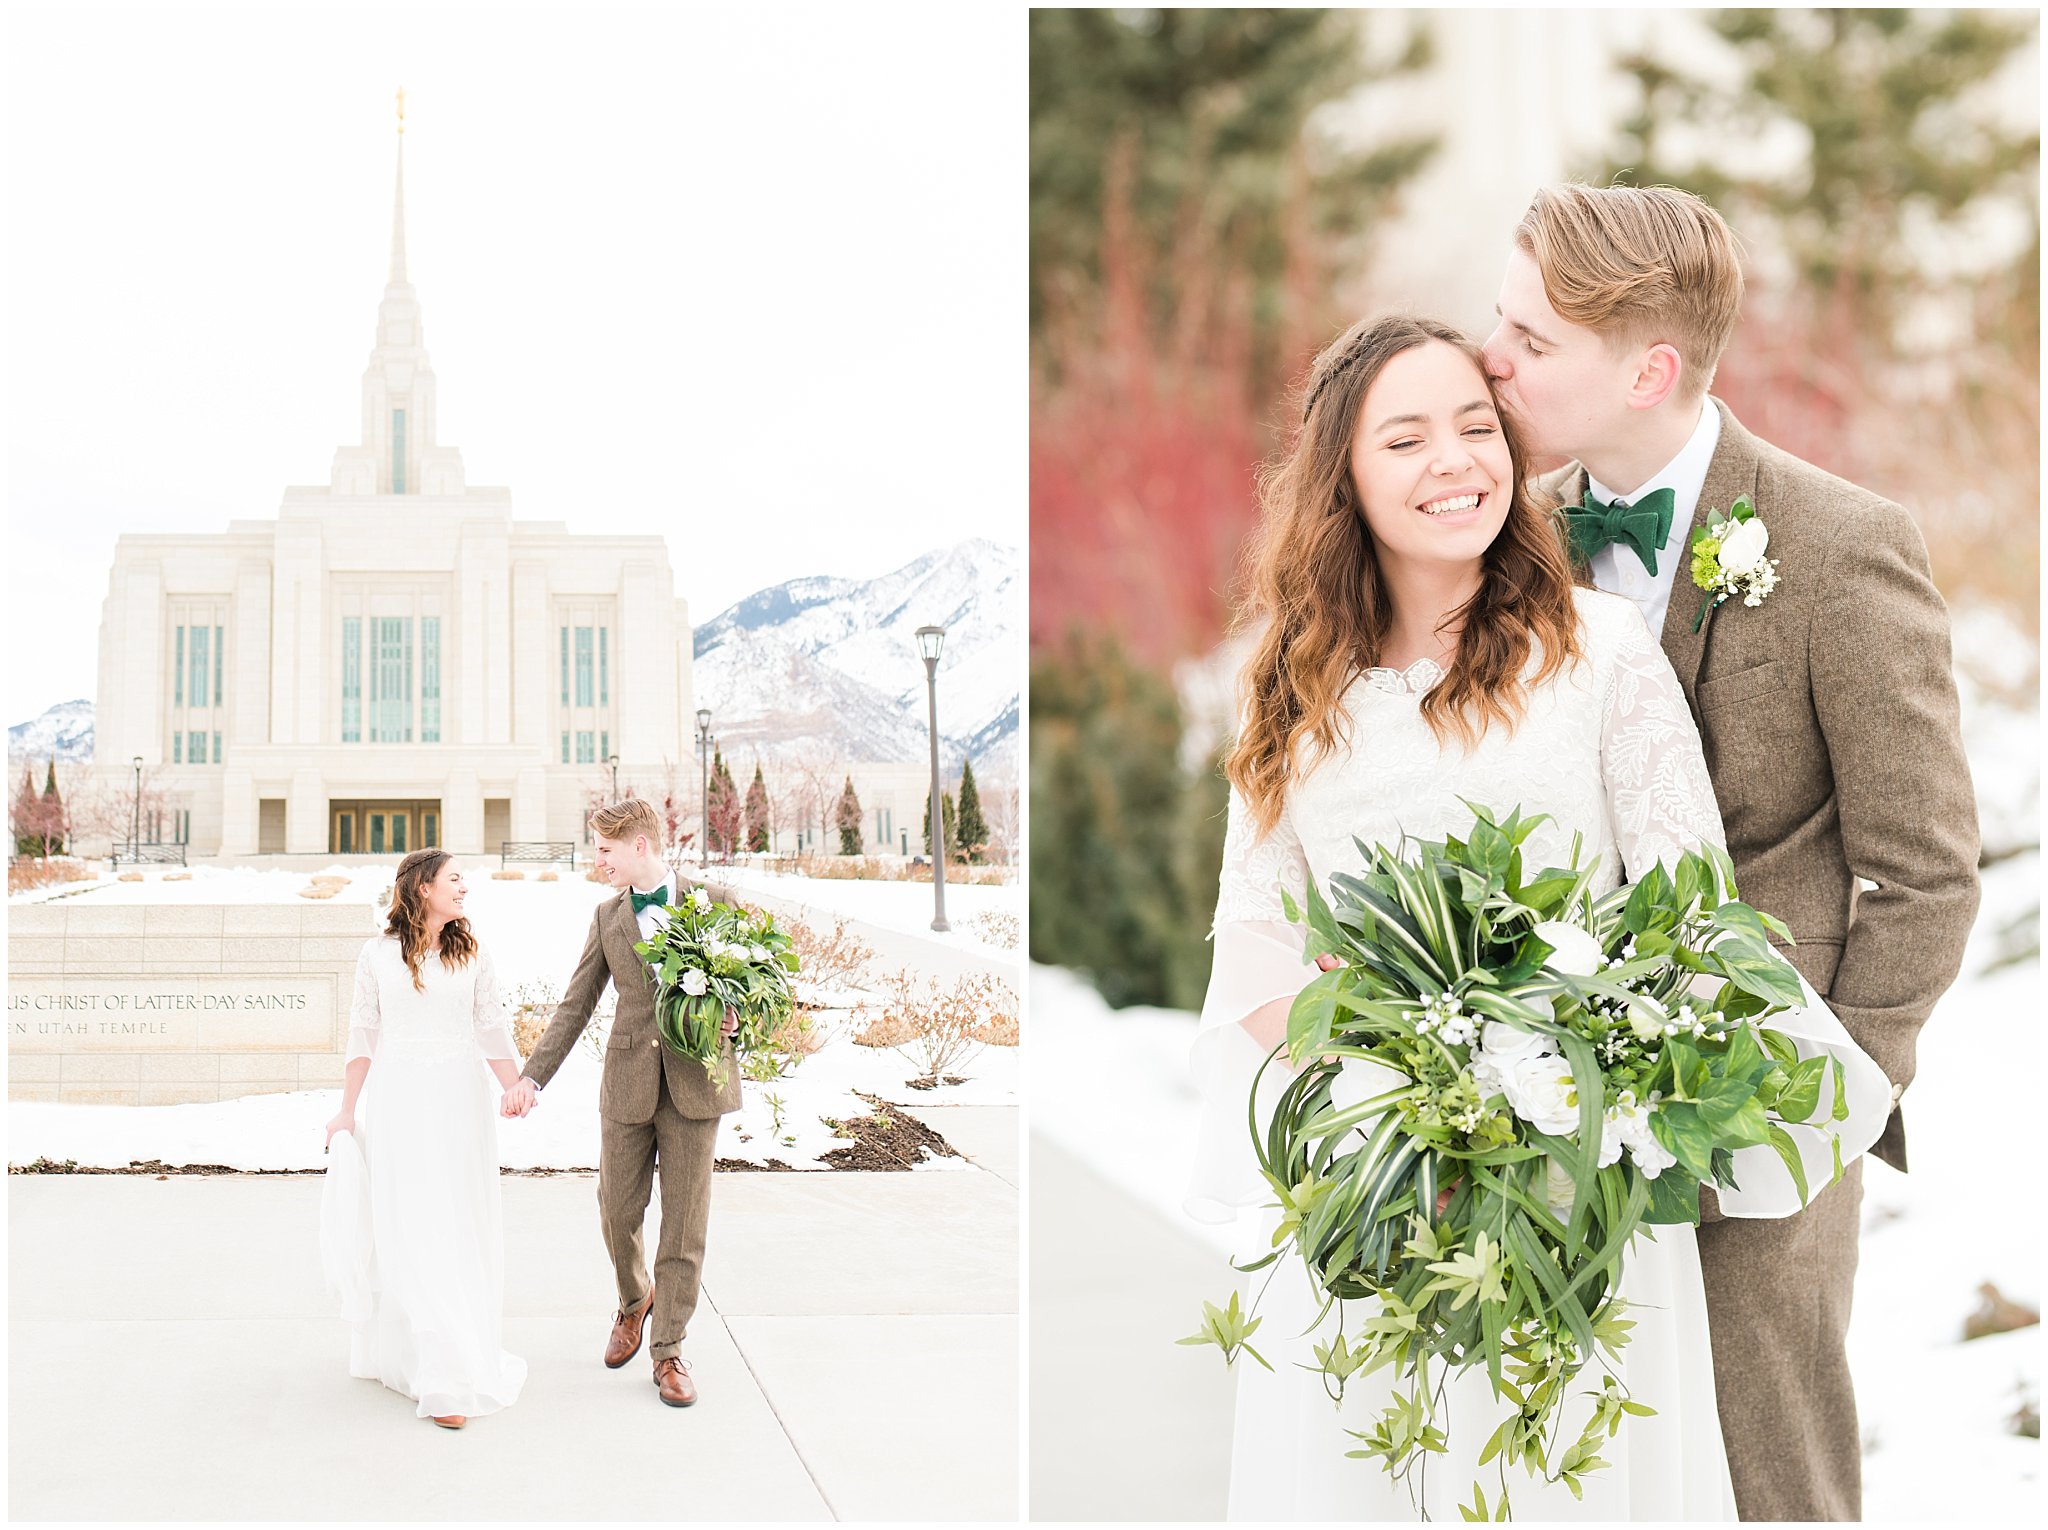 Bride and groom portraits during Ogden Temple winter wedding | Brown, Emerald Green, and white wedding | Ogden Temple and Sweet Magnolia Wedding | Jessie and Dallin Photography